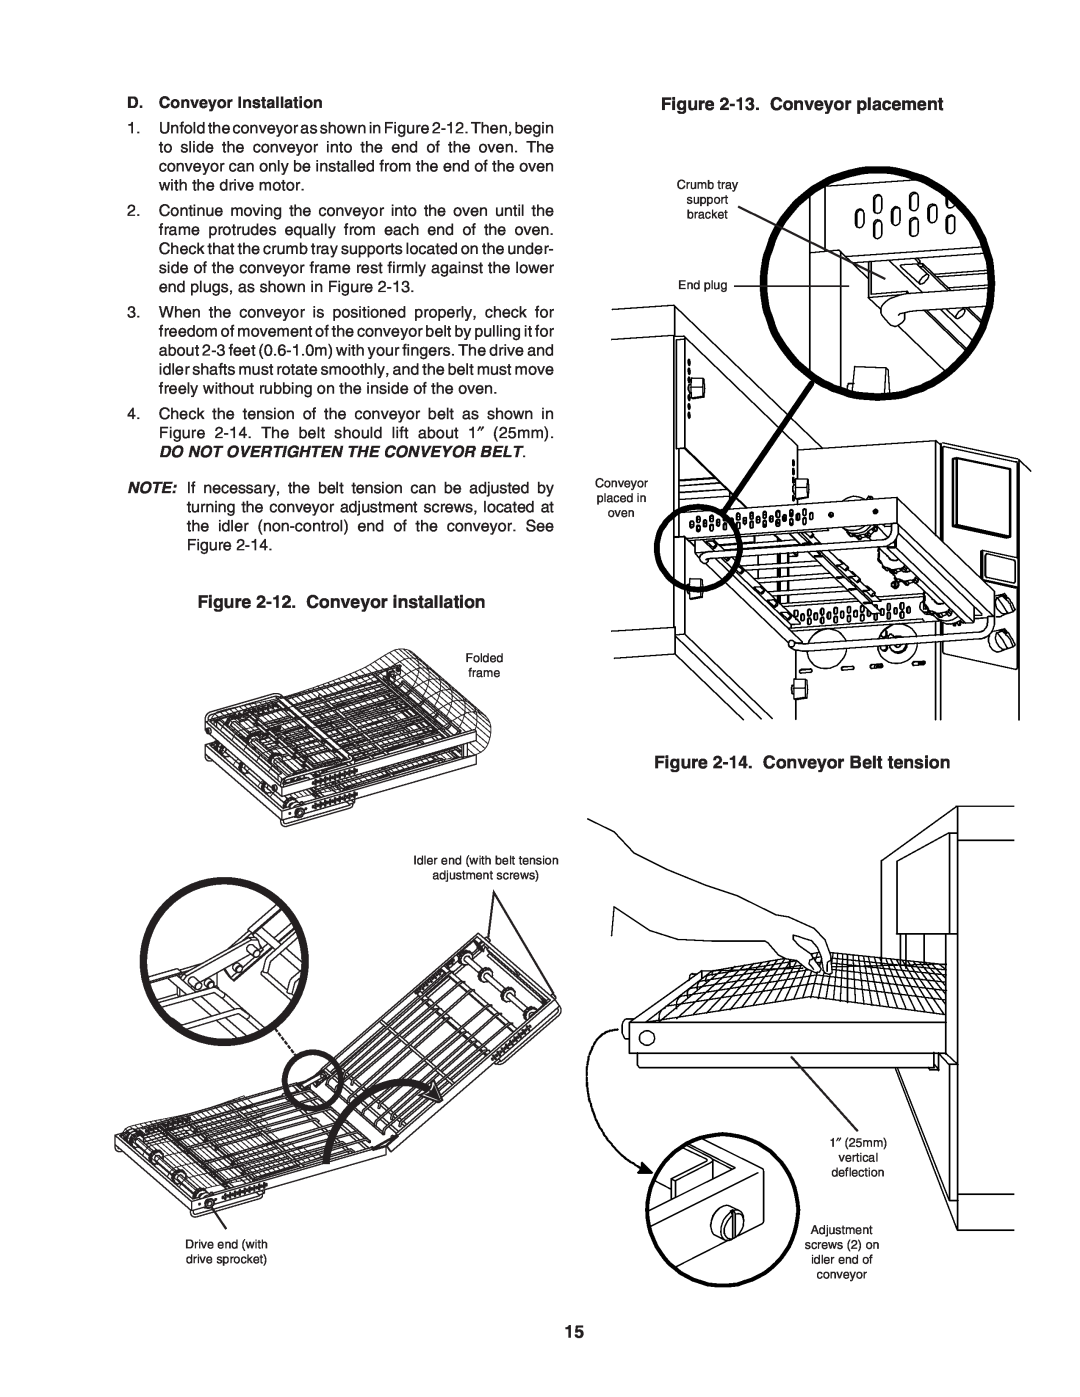 Middleby Marshall PS640 installation manual 12. Conveyor installation, 13. Conveyor placement, 14. Conveyor Belt tension 